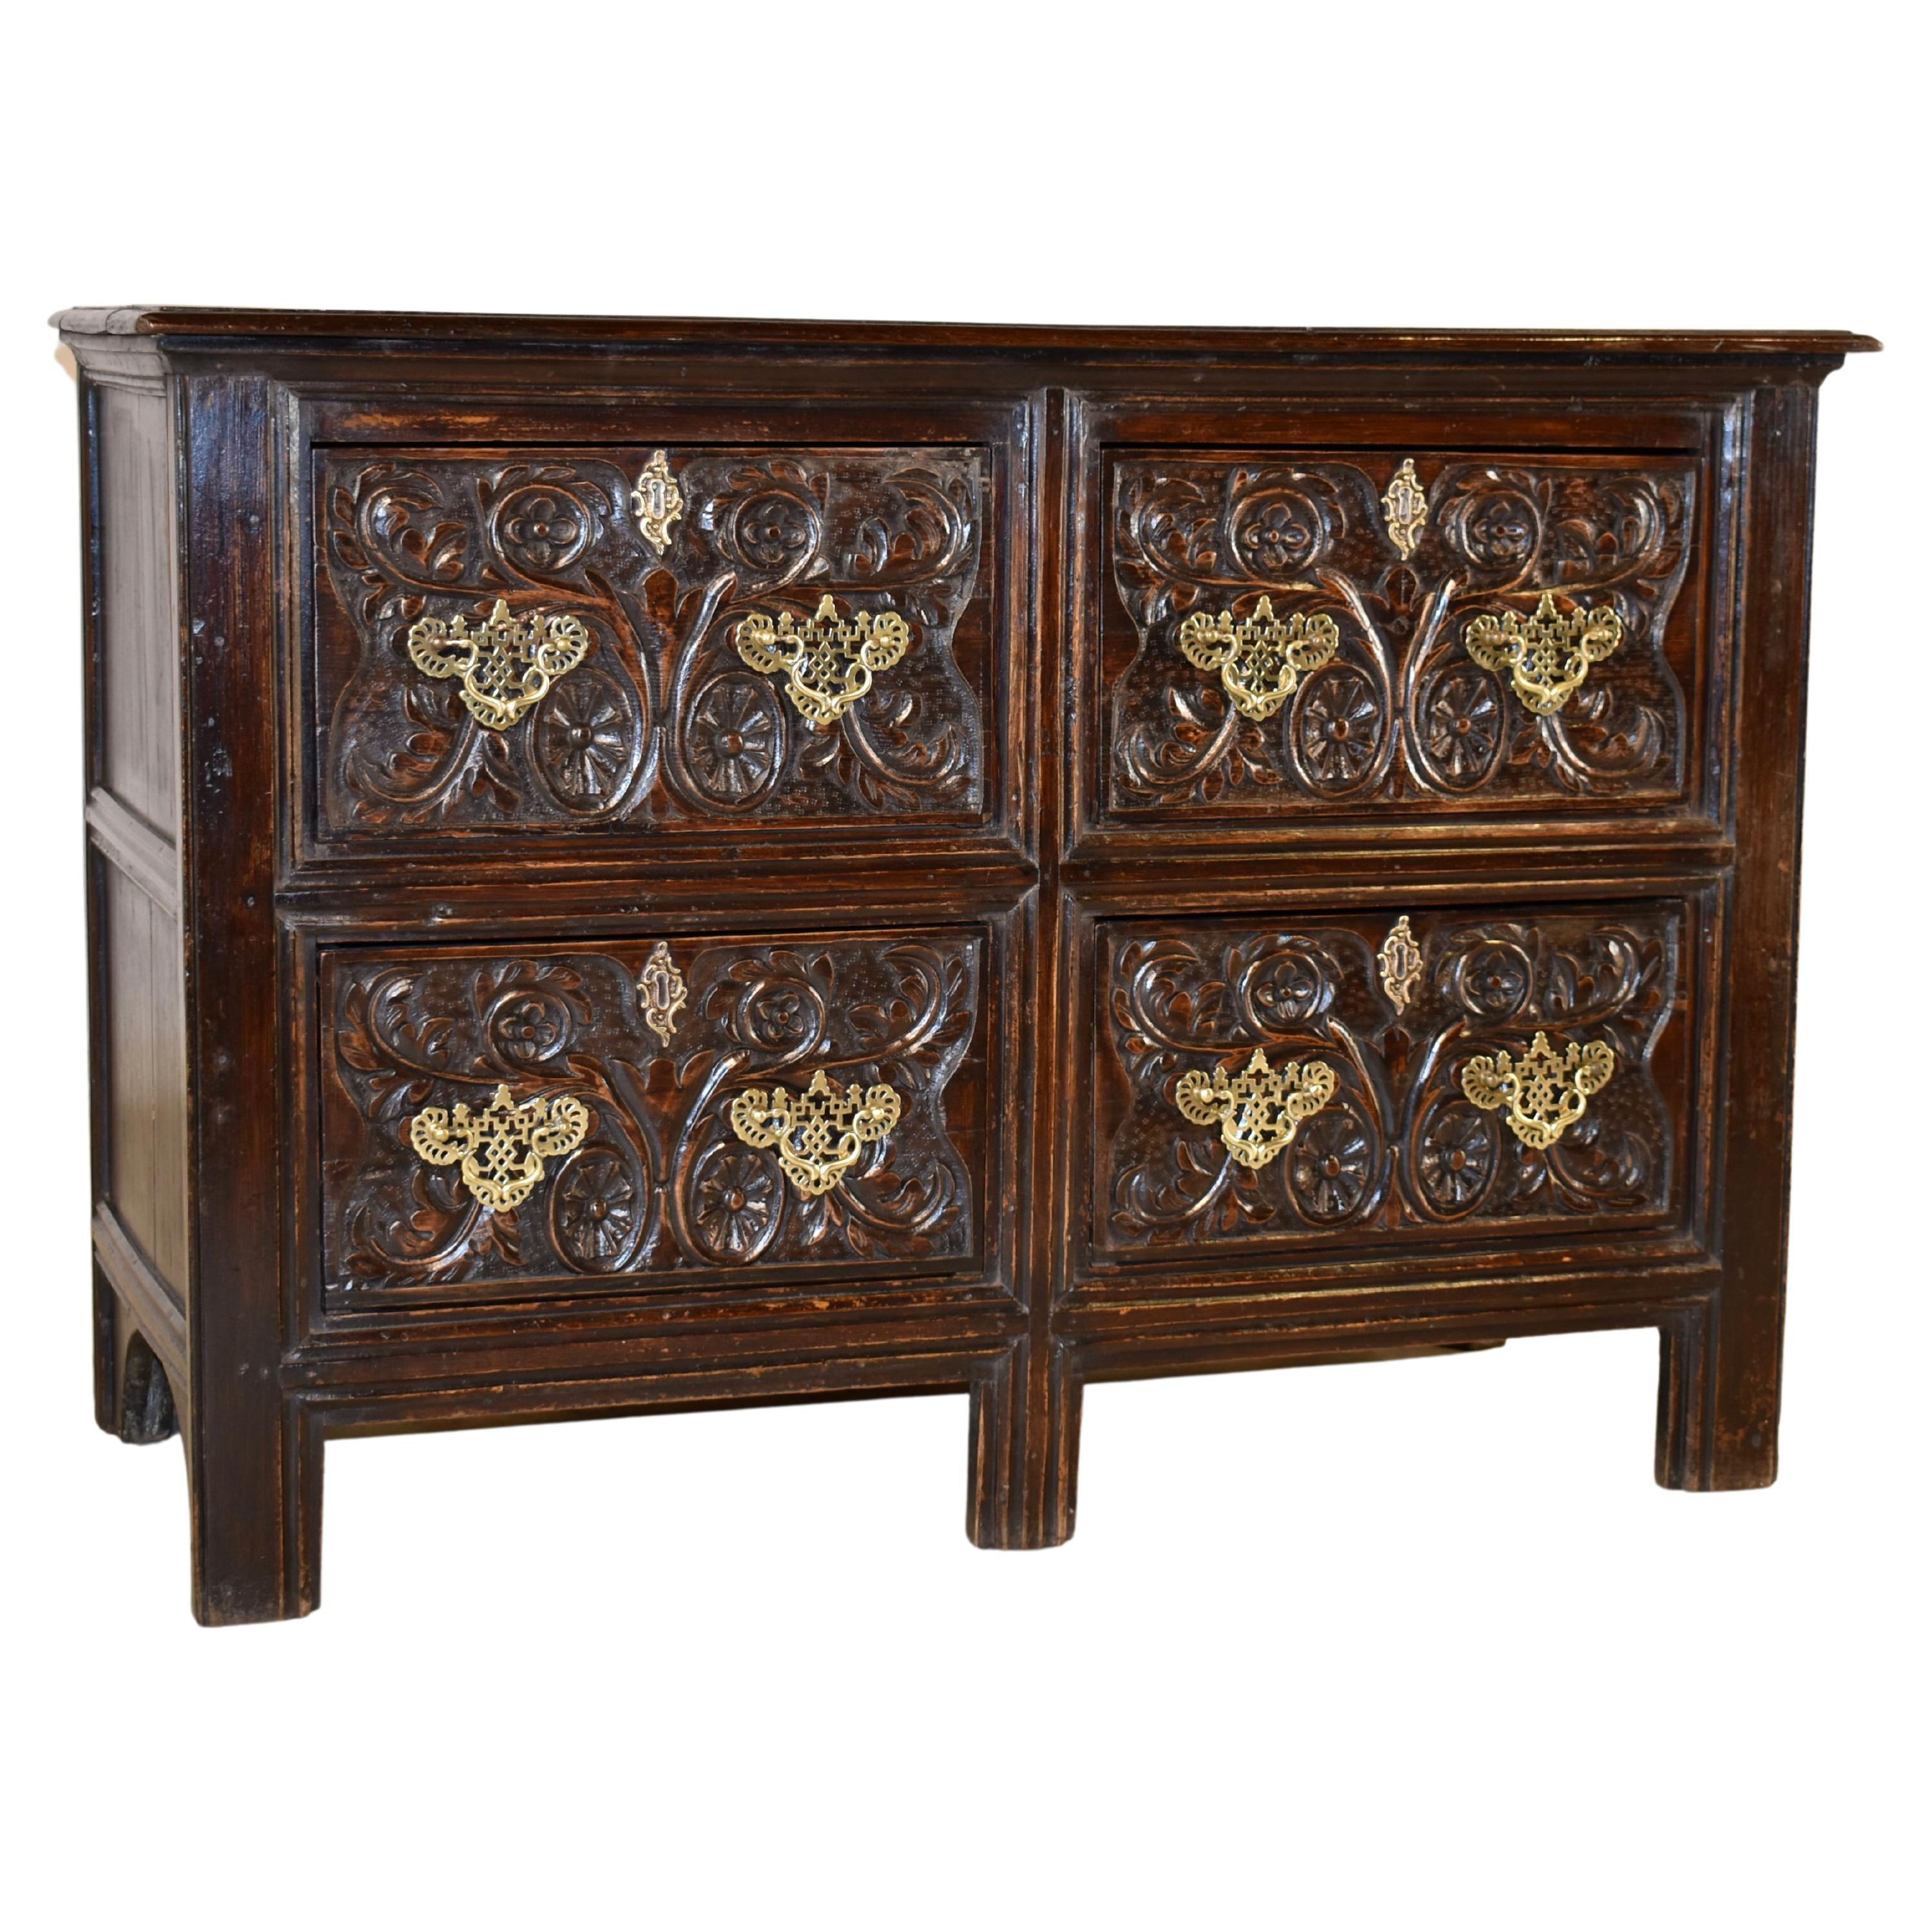 18th Century English Oak Chest of Drawers